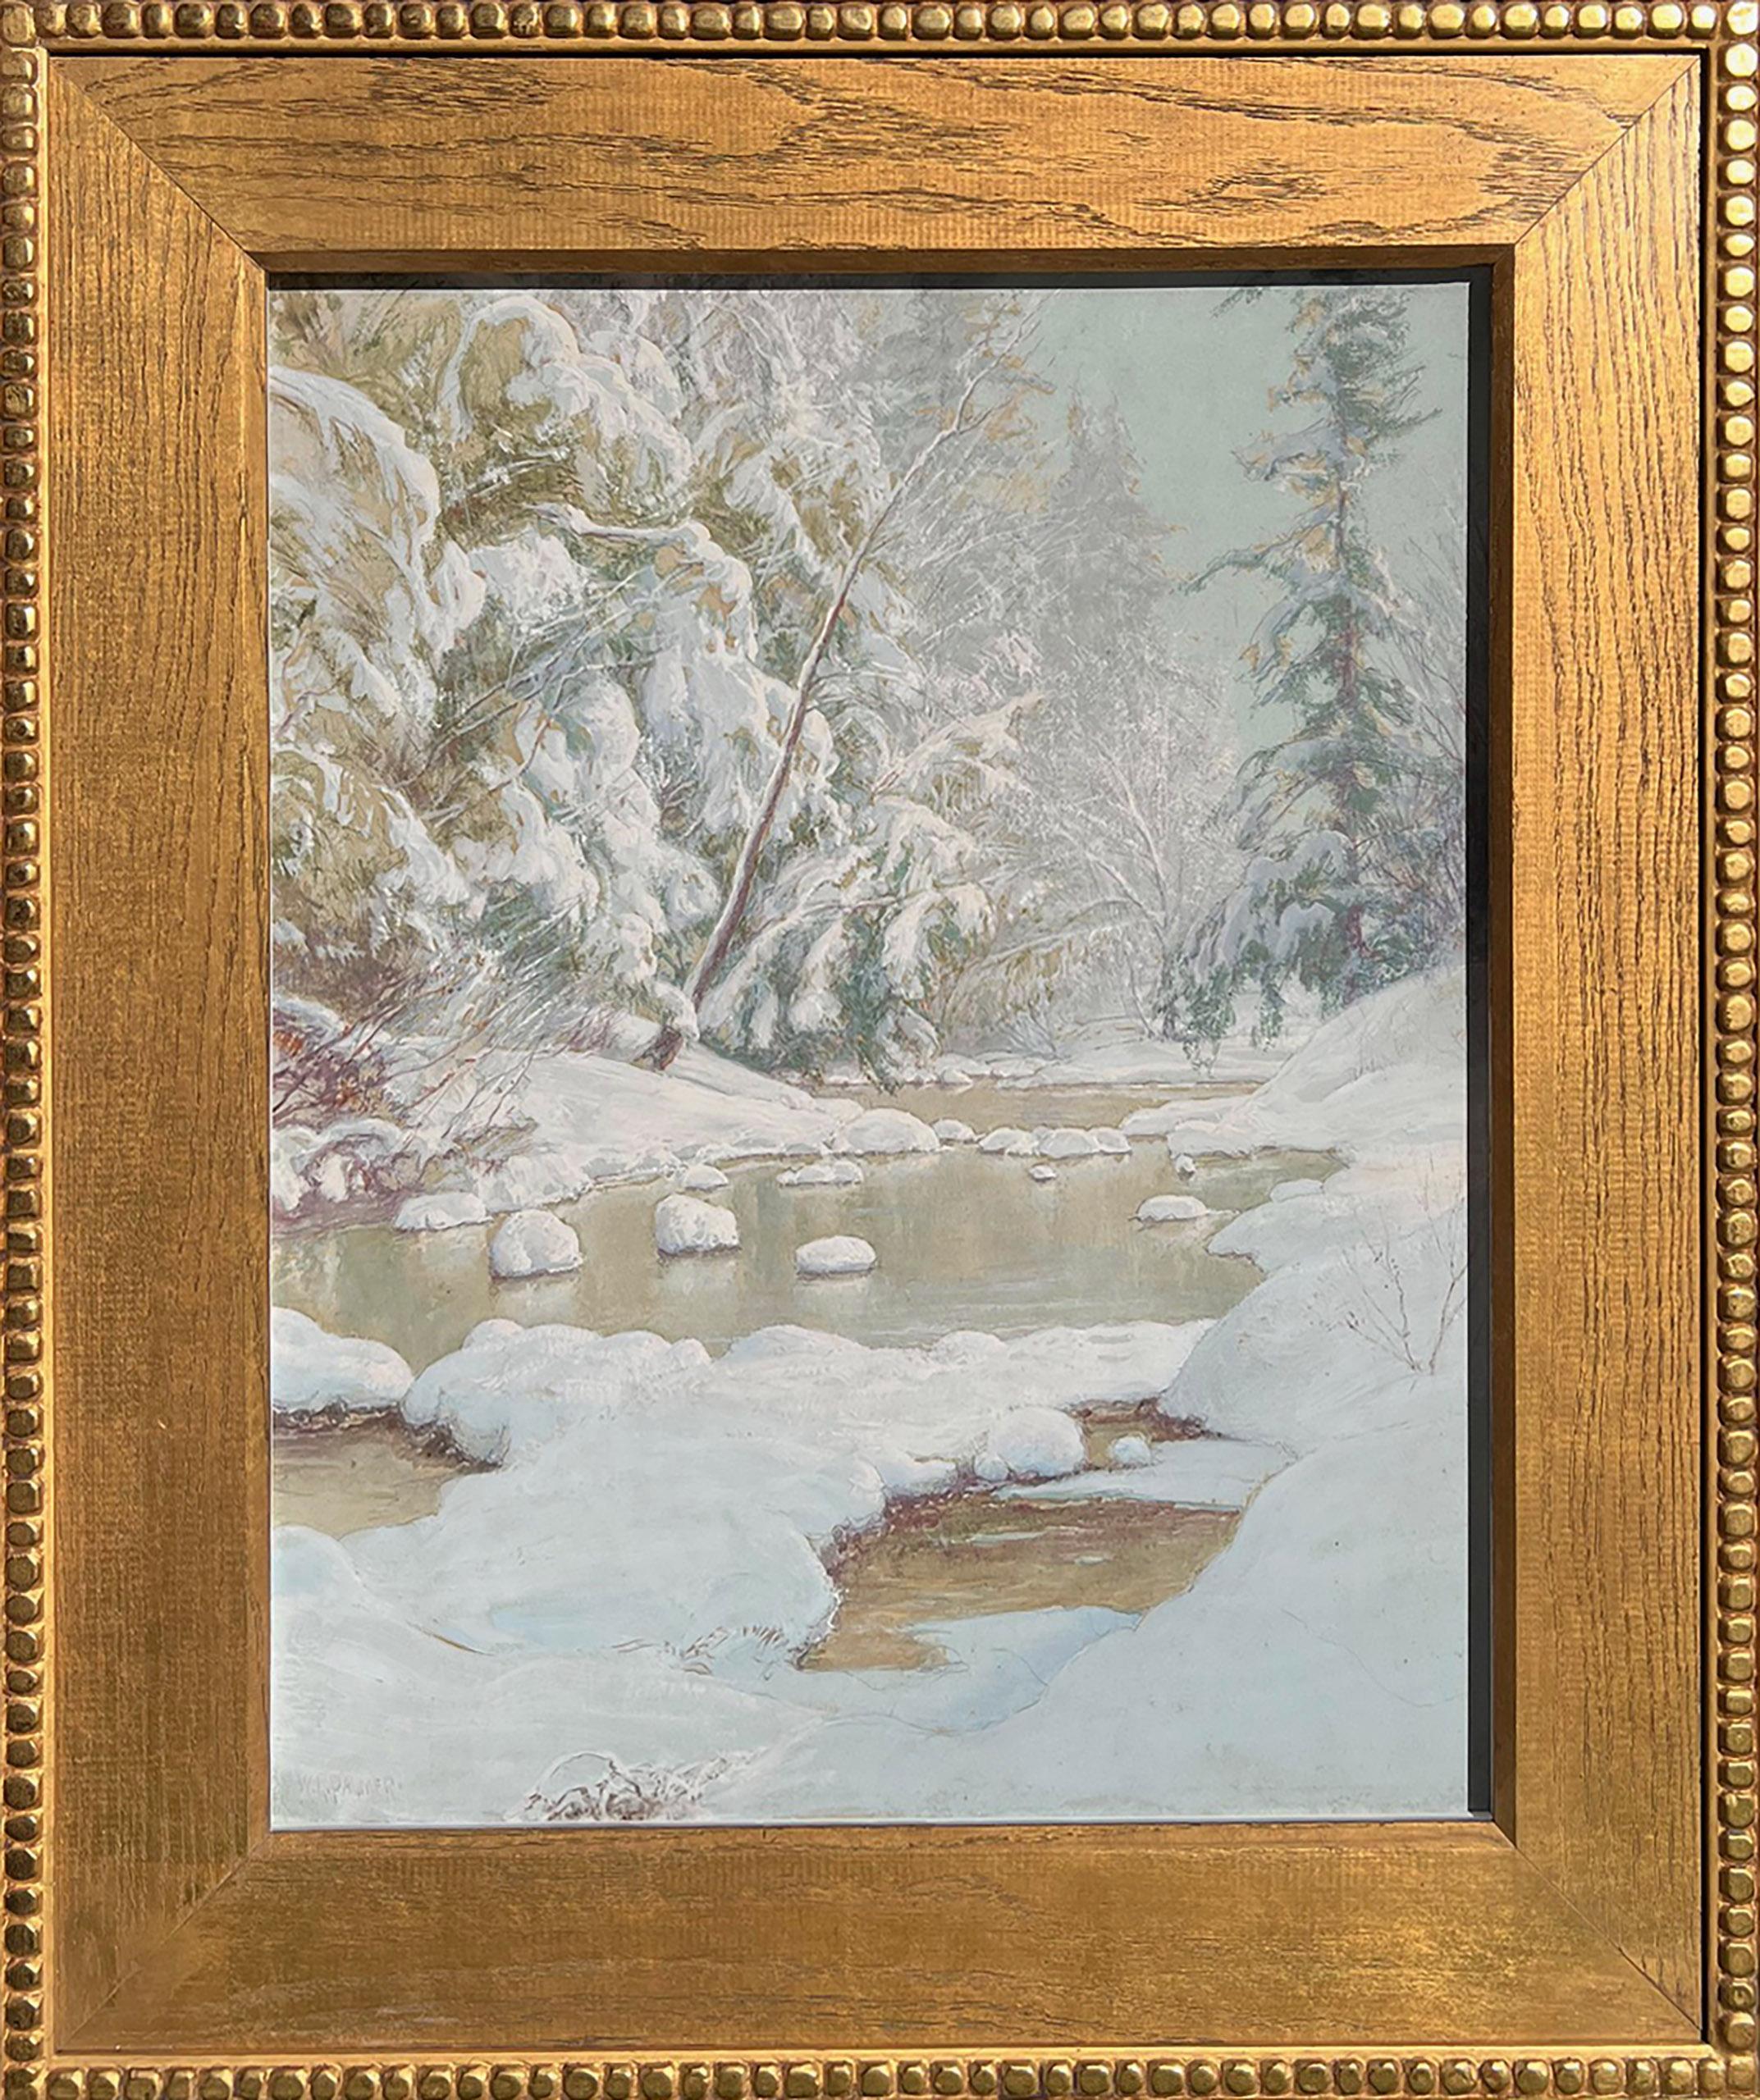 The work of American artist Walter Launt Palmer (1854-1932) provides a bridge between the traditional landscapes of the Hudson River School and the more modern work of the American Impressionist movement. "Winter Stream" reveals Palmer's mastery of